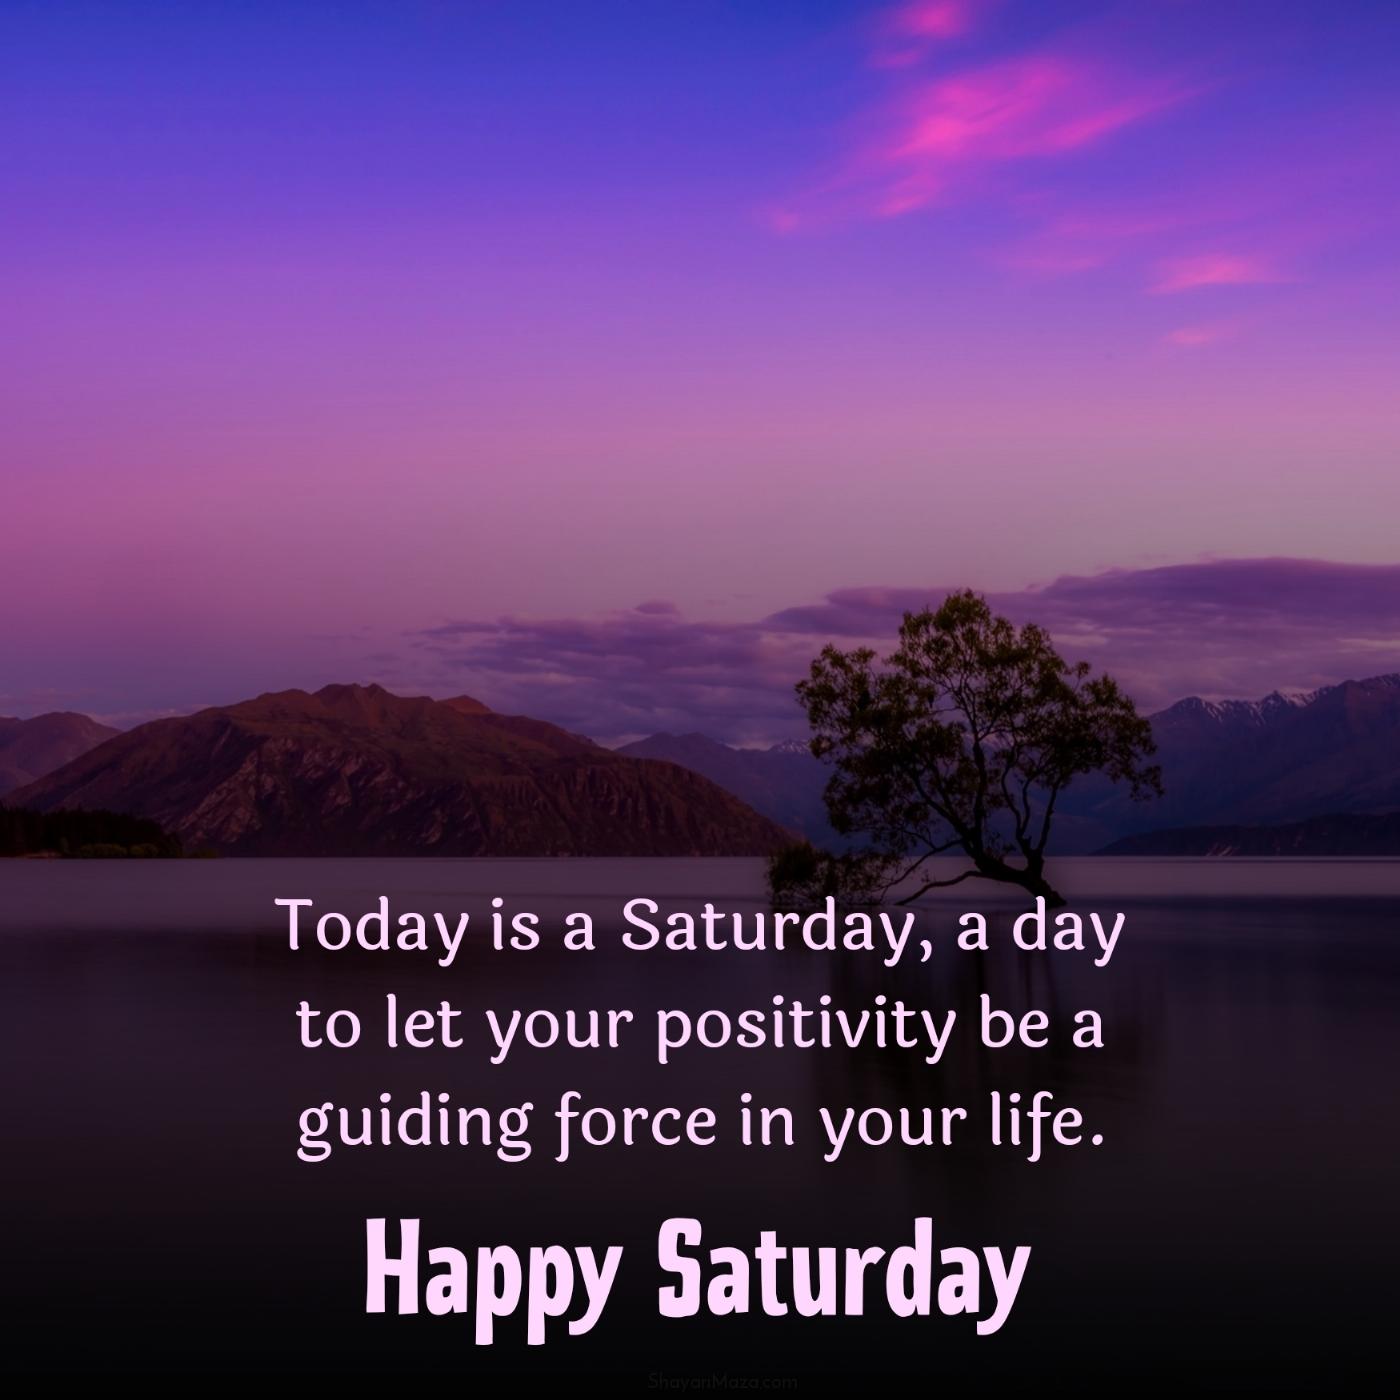 Today is a Saturday a day to let your positivity be a guiding force